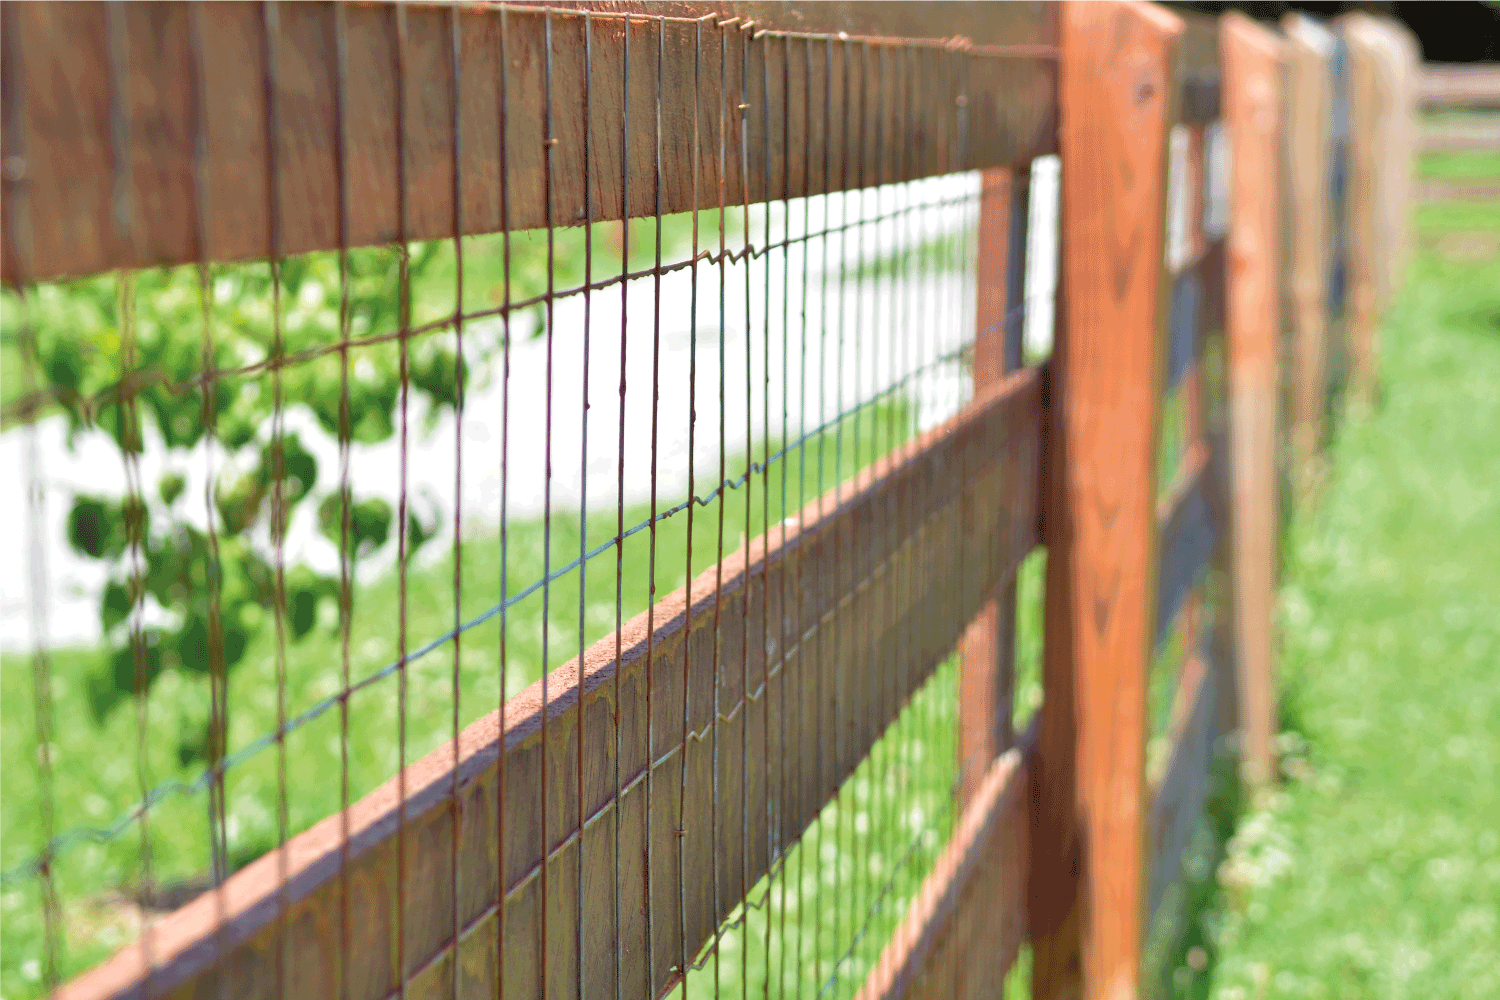 Split Rail Fence with attached wire material for added security